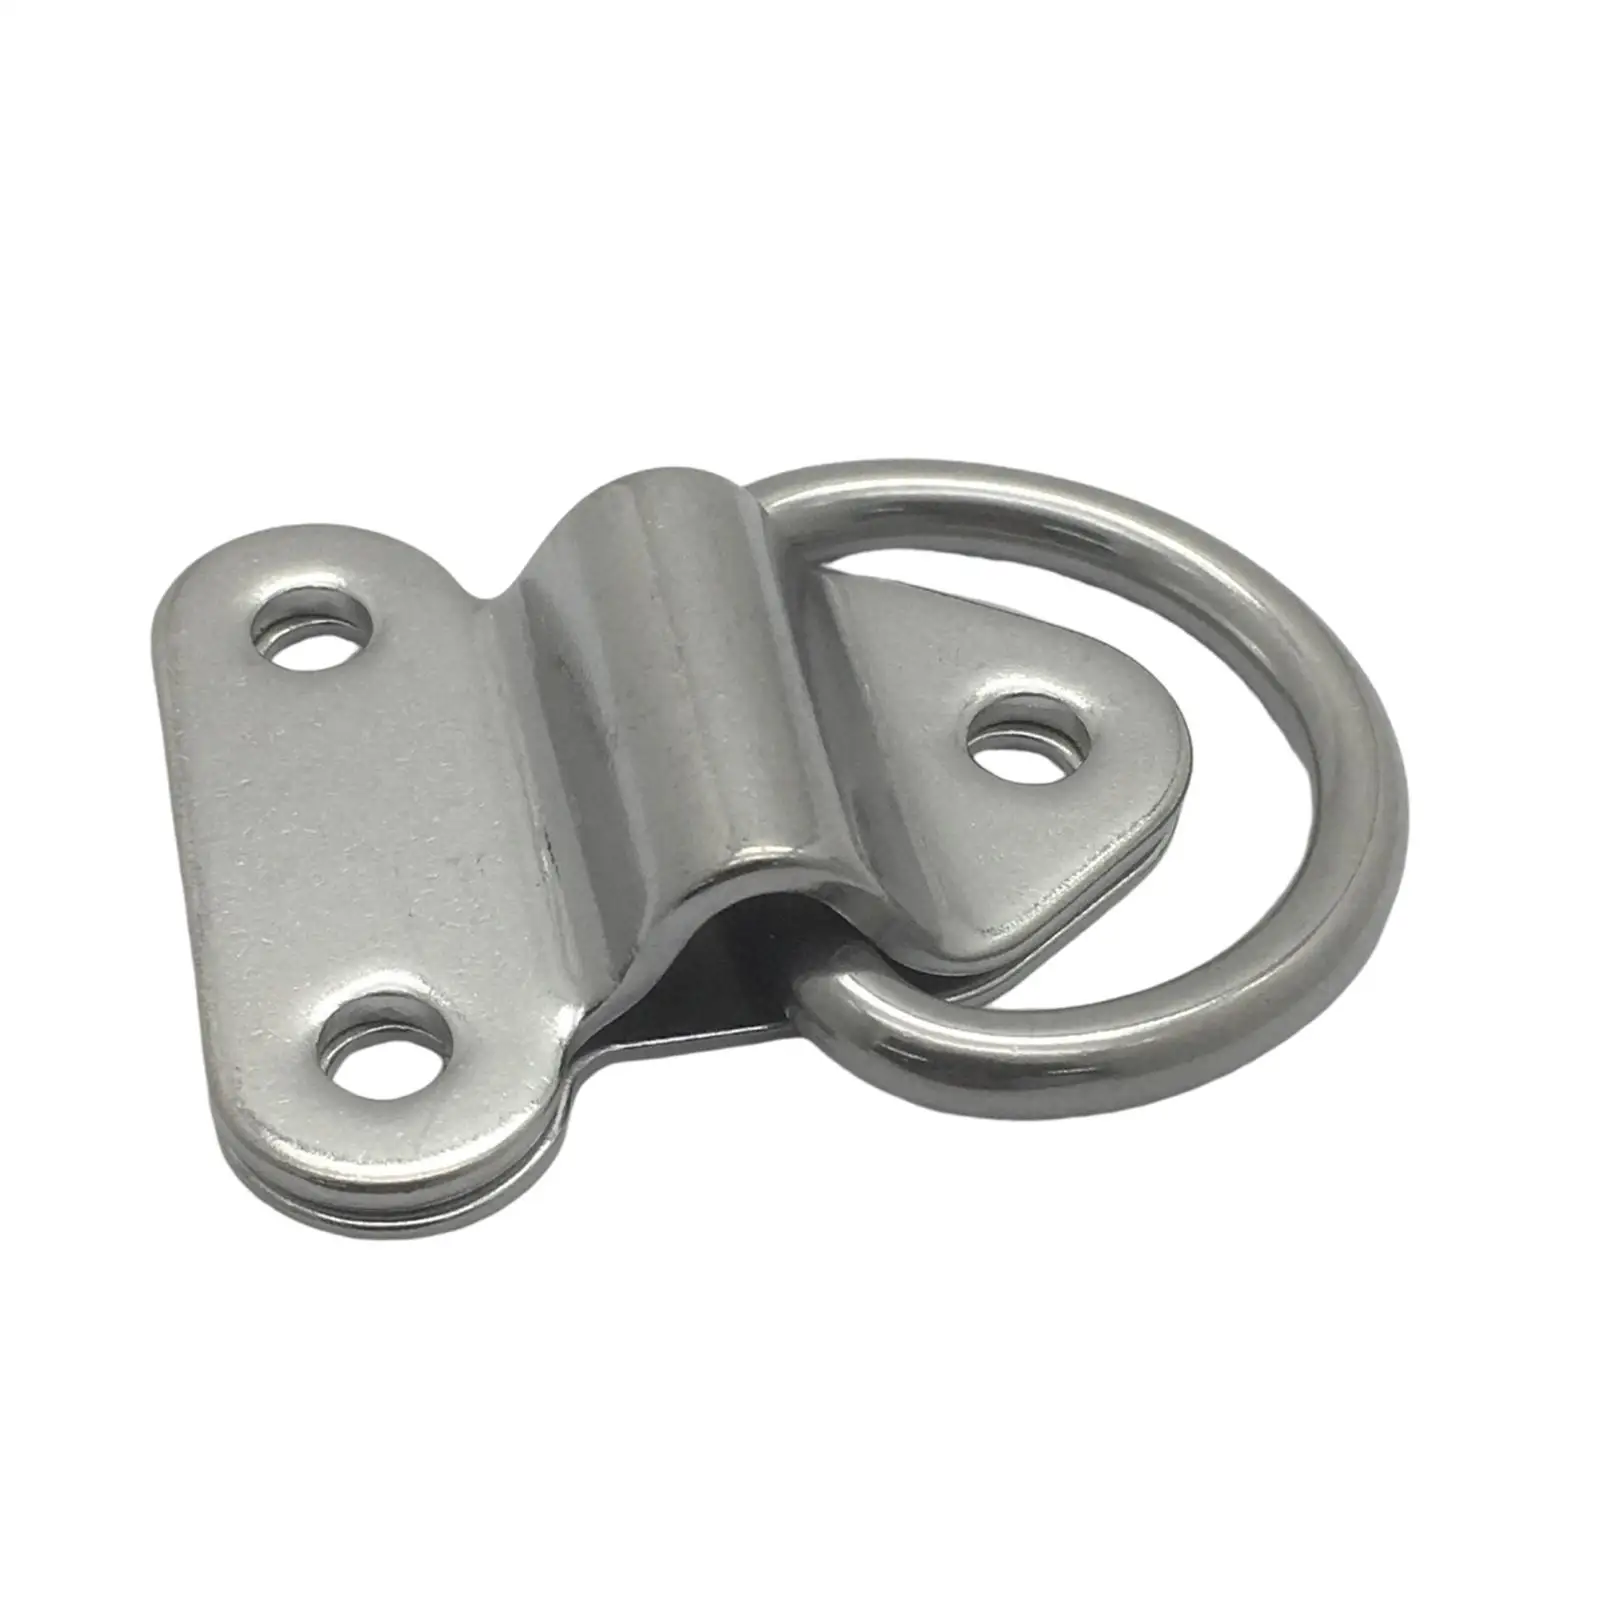 Folding Deck Pad Eyes Lashing D Ring Handle Stainless Steel Universal Heavy Duty Pull Ring for Ship Trailer Boats Truck